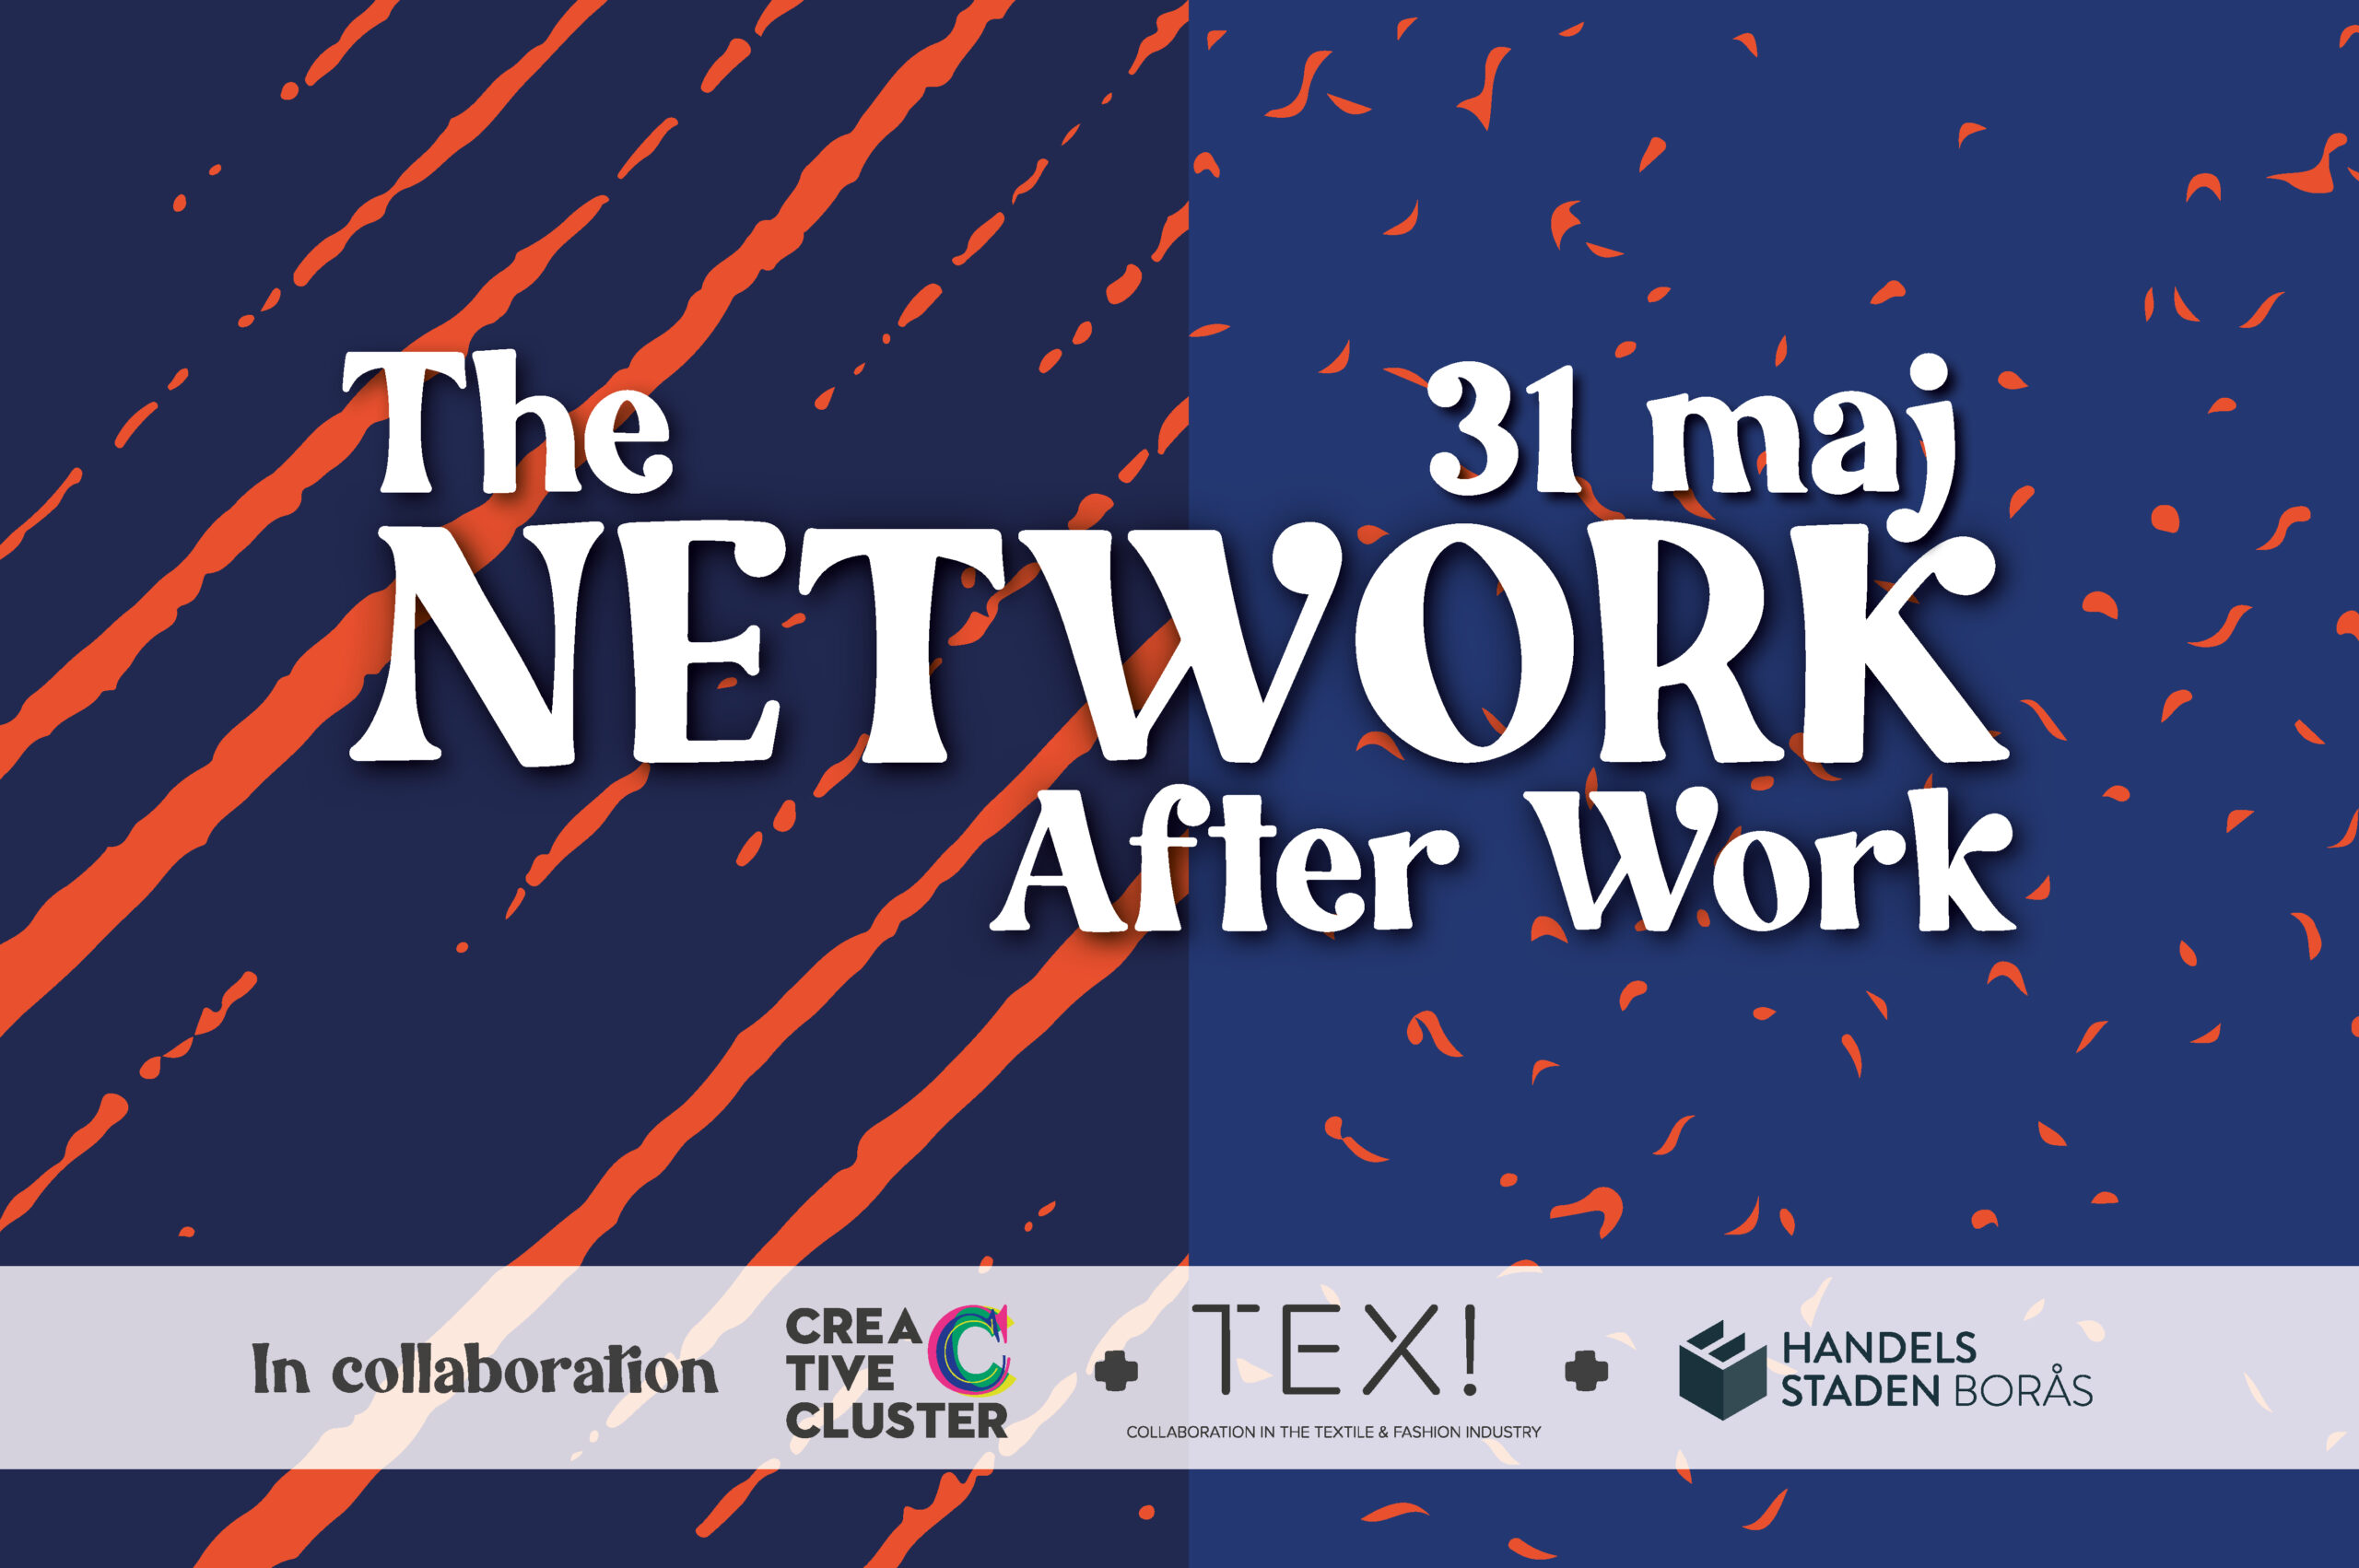 The NETWORK After Work